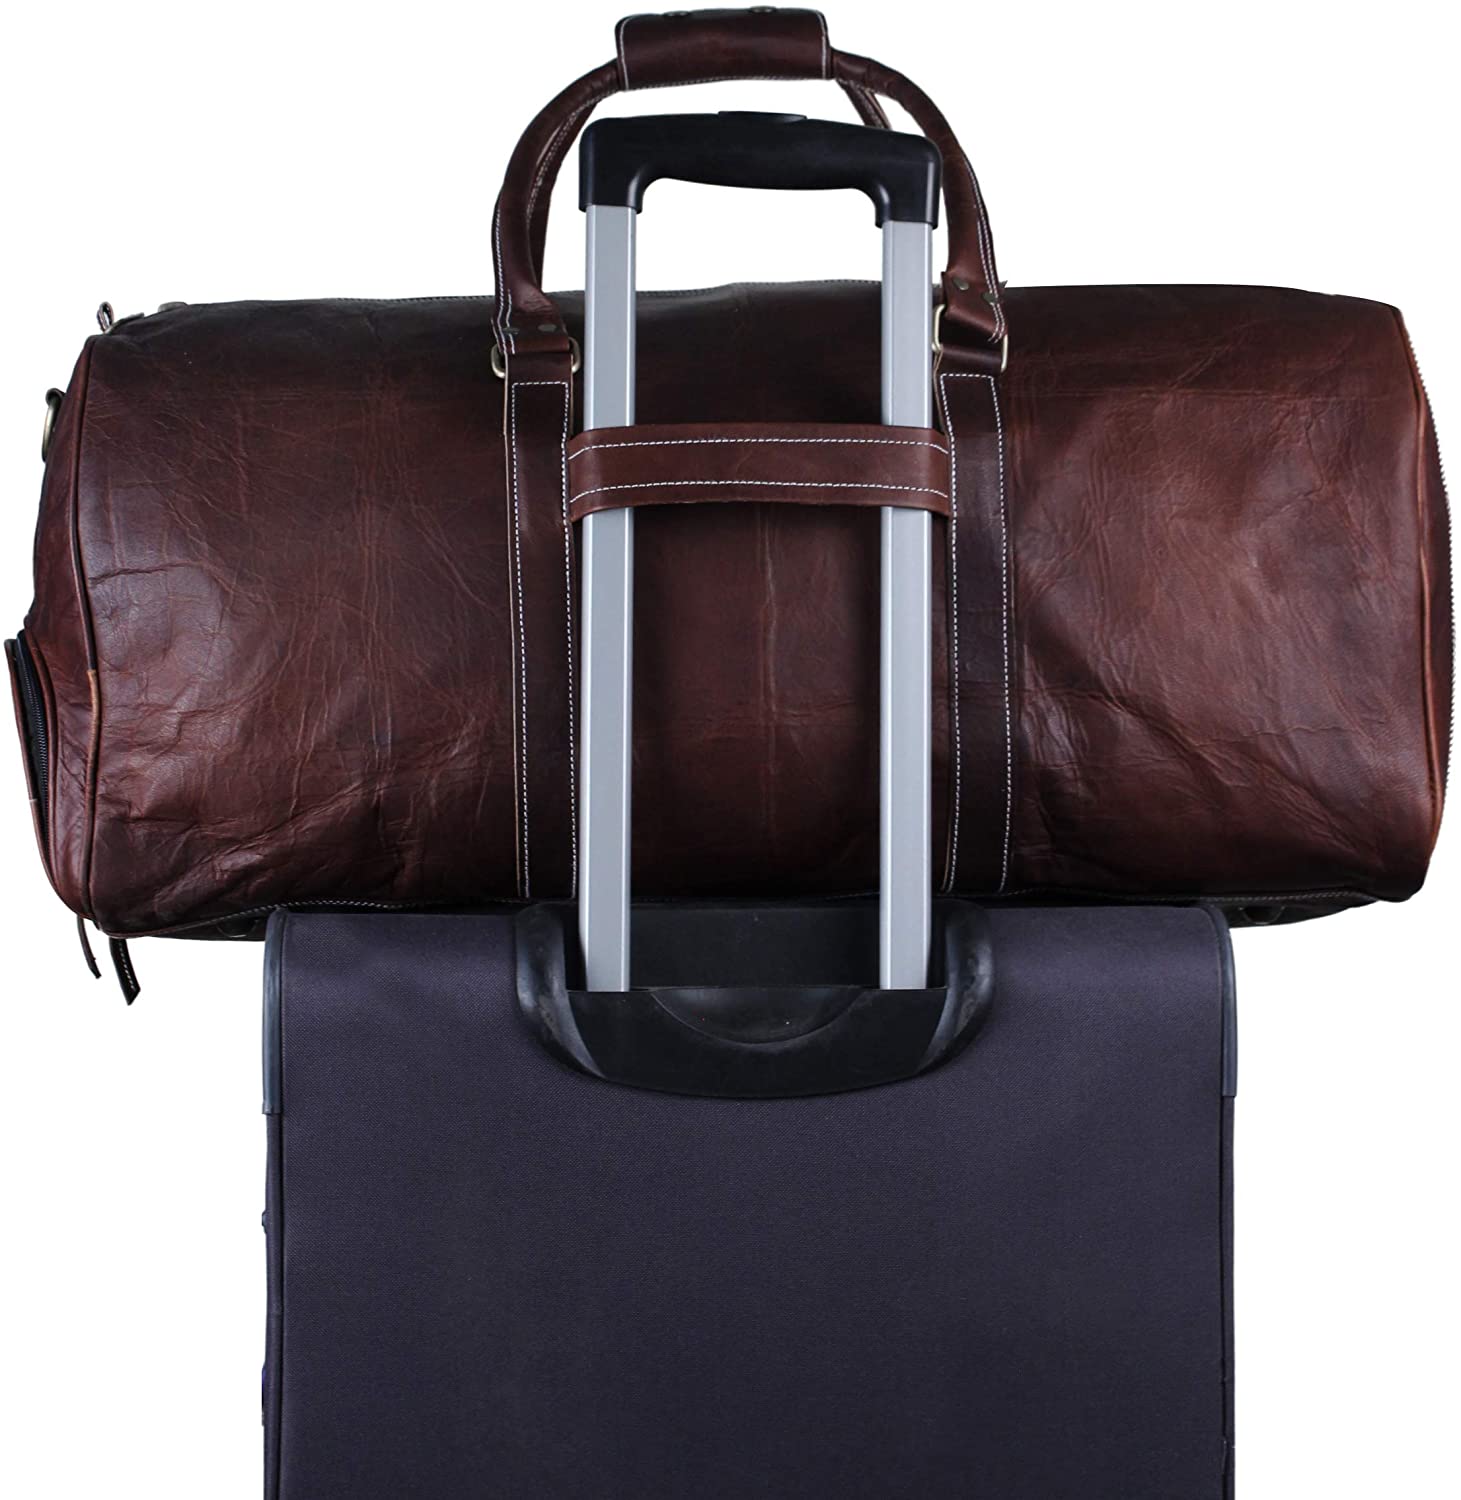 prefect for travelling duffle bag